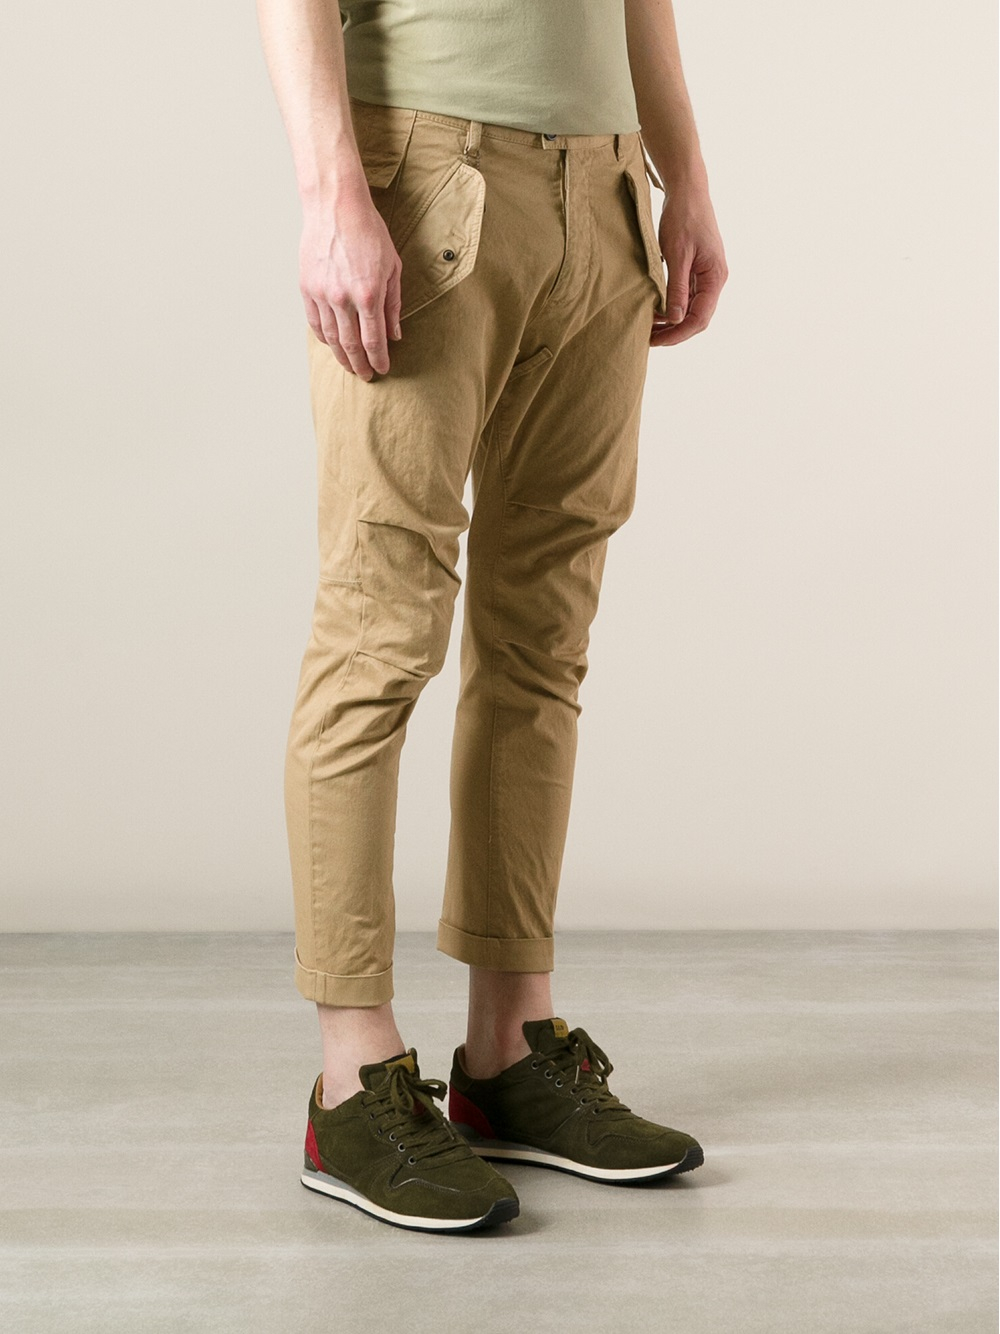 DSquared² Cropped Skinny Chinos in Natural for Men - Lyst